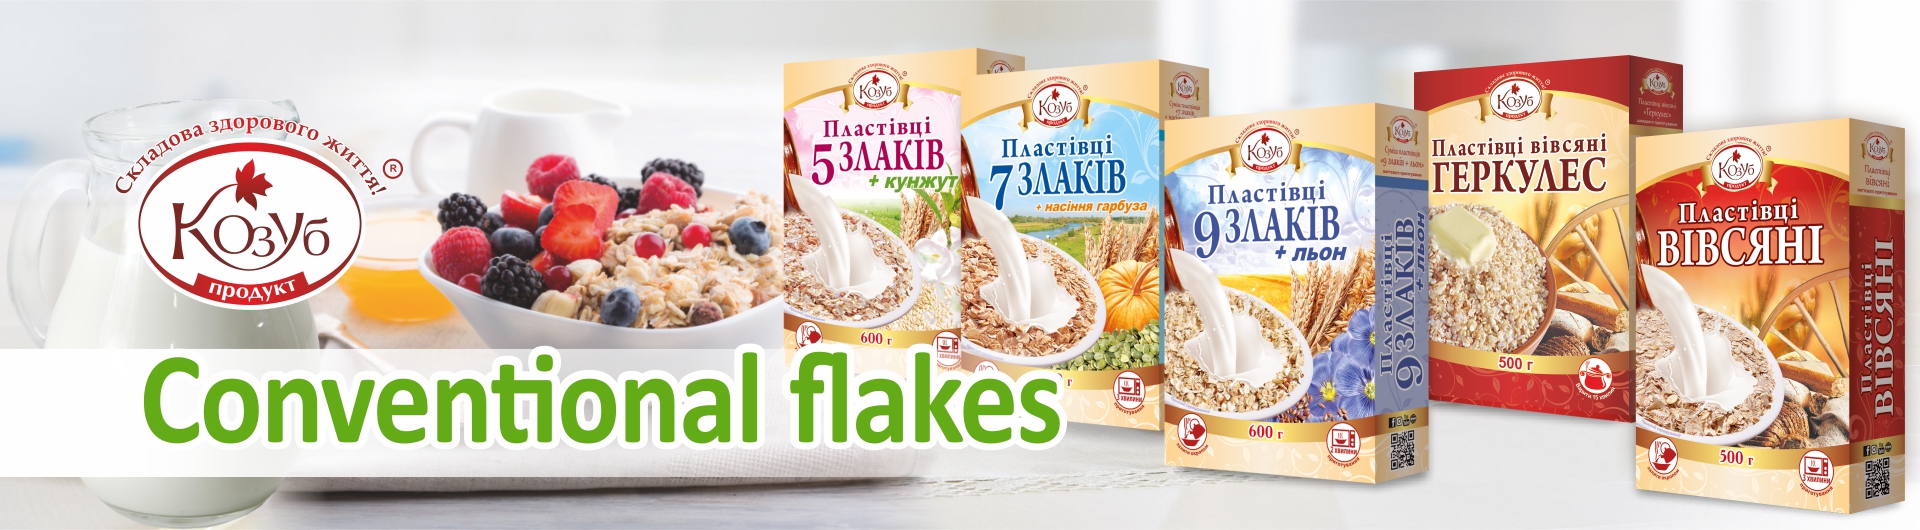 Conventional flakes (1) (1)